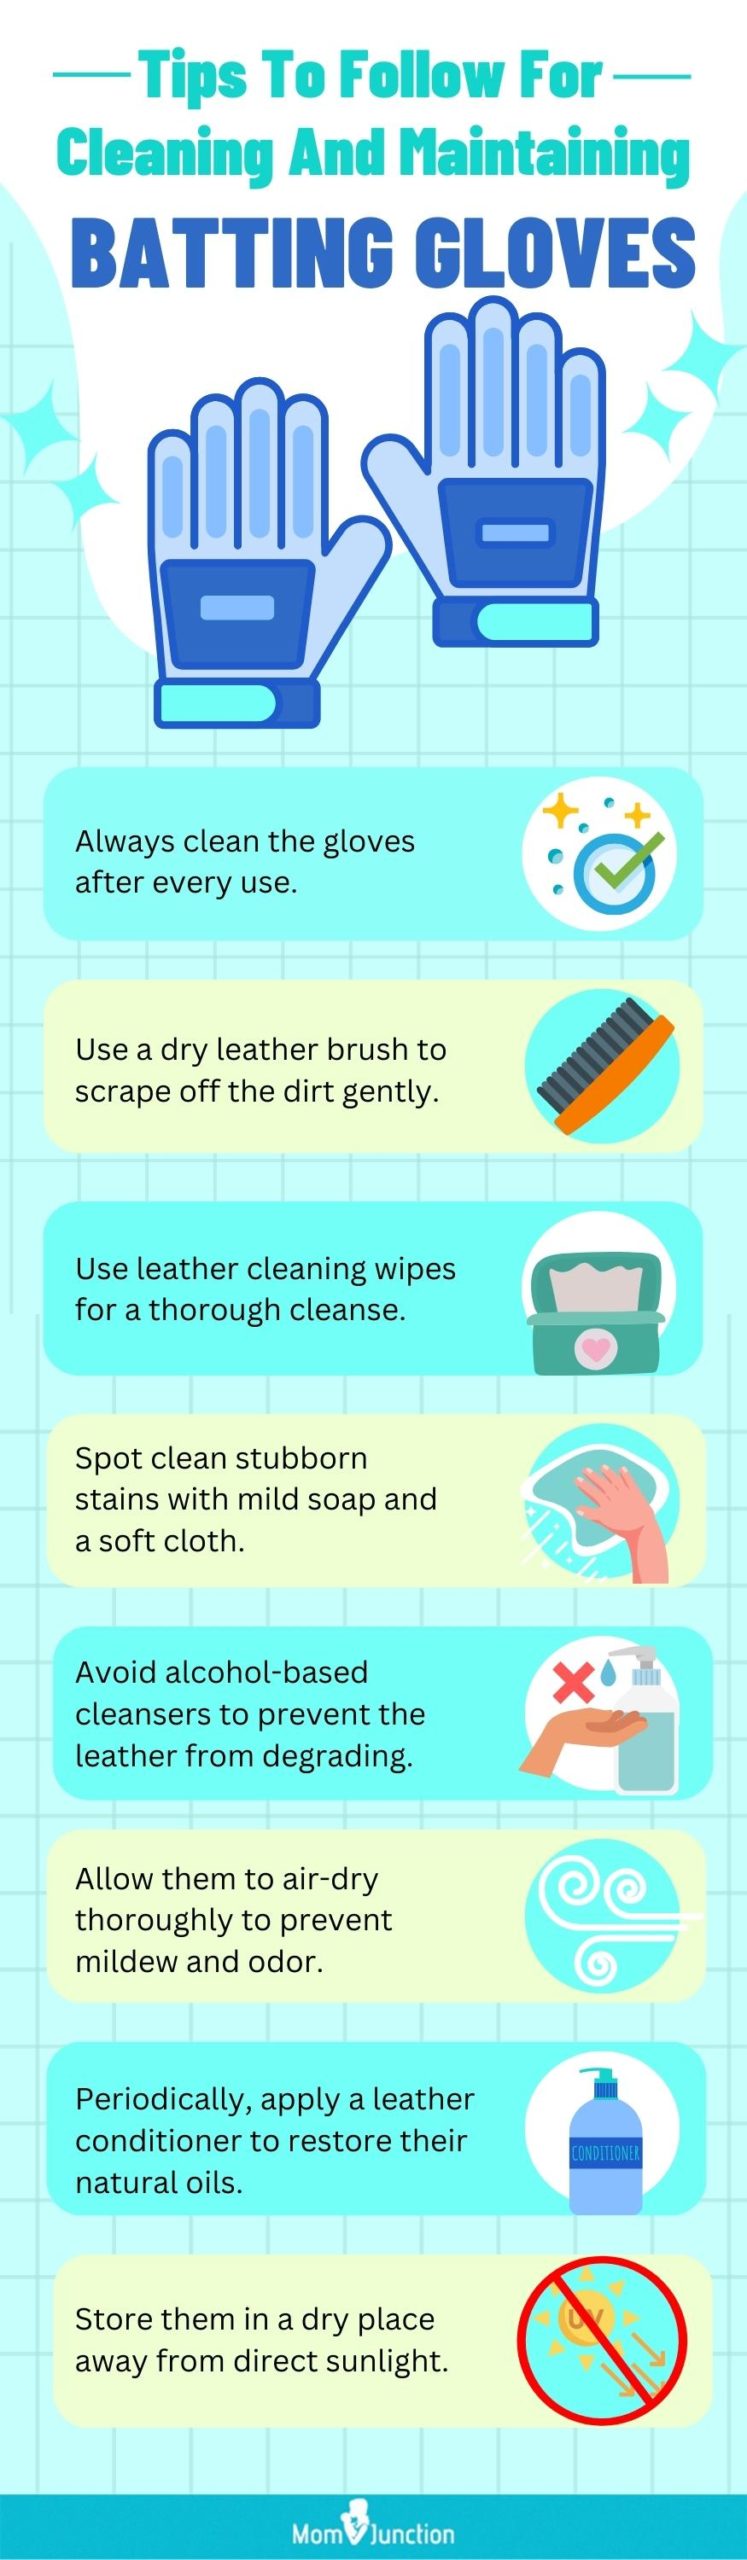 Tips To Follow For Cleaning And Maintaining Batting Gloves (infographic)